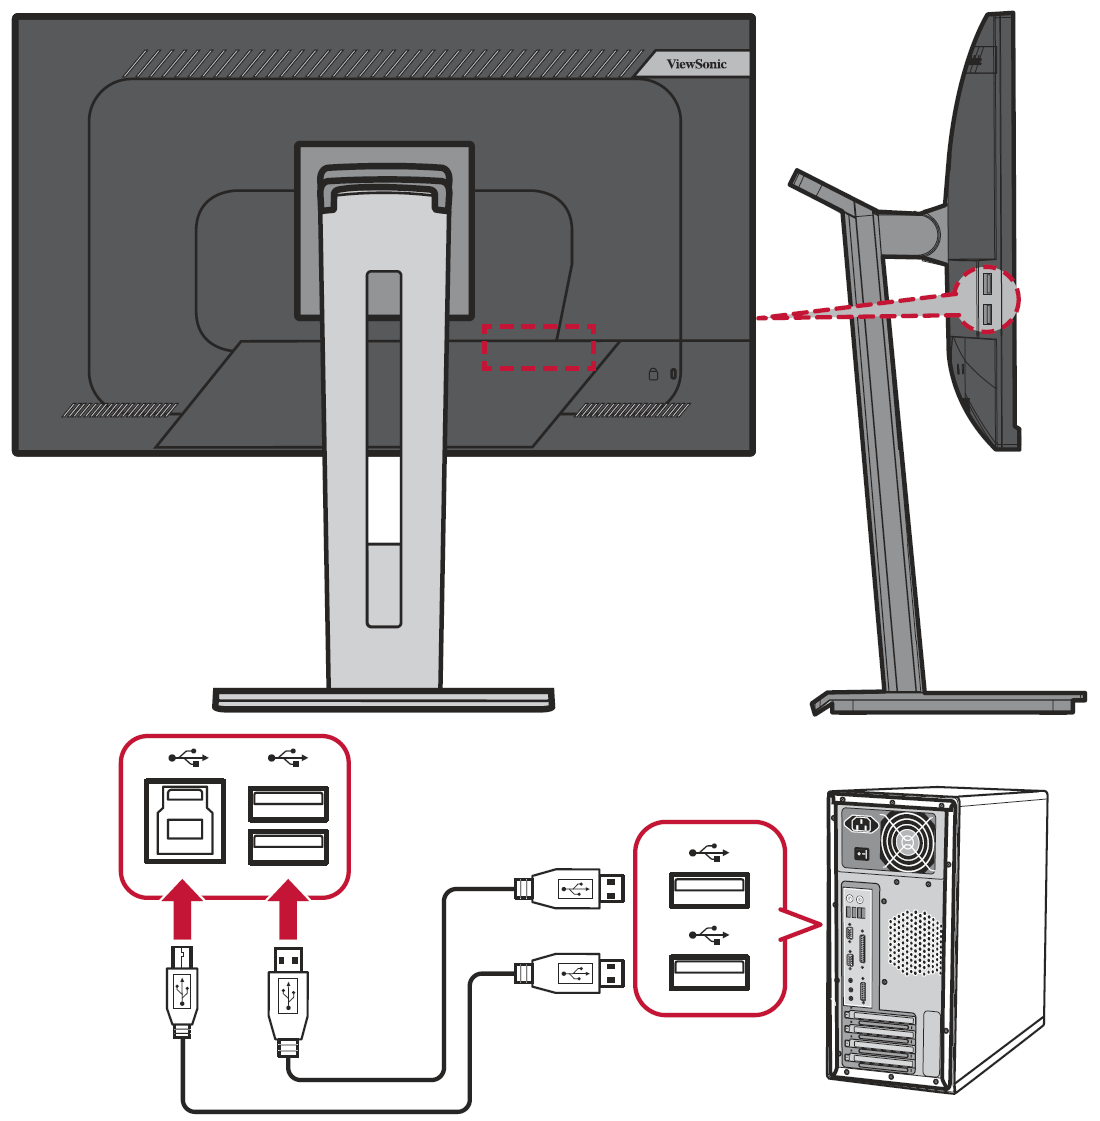 File:VG2748a Connect USB.png